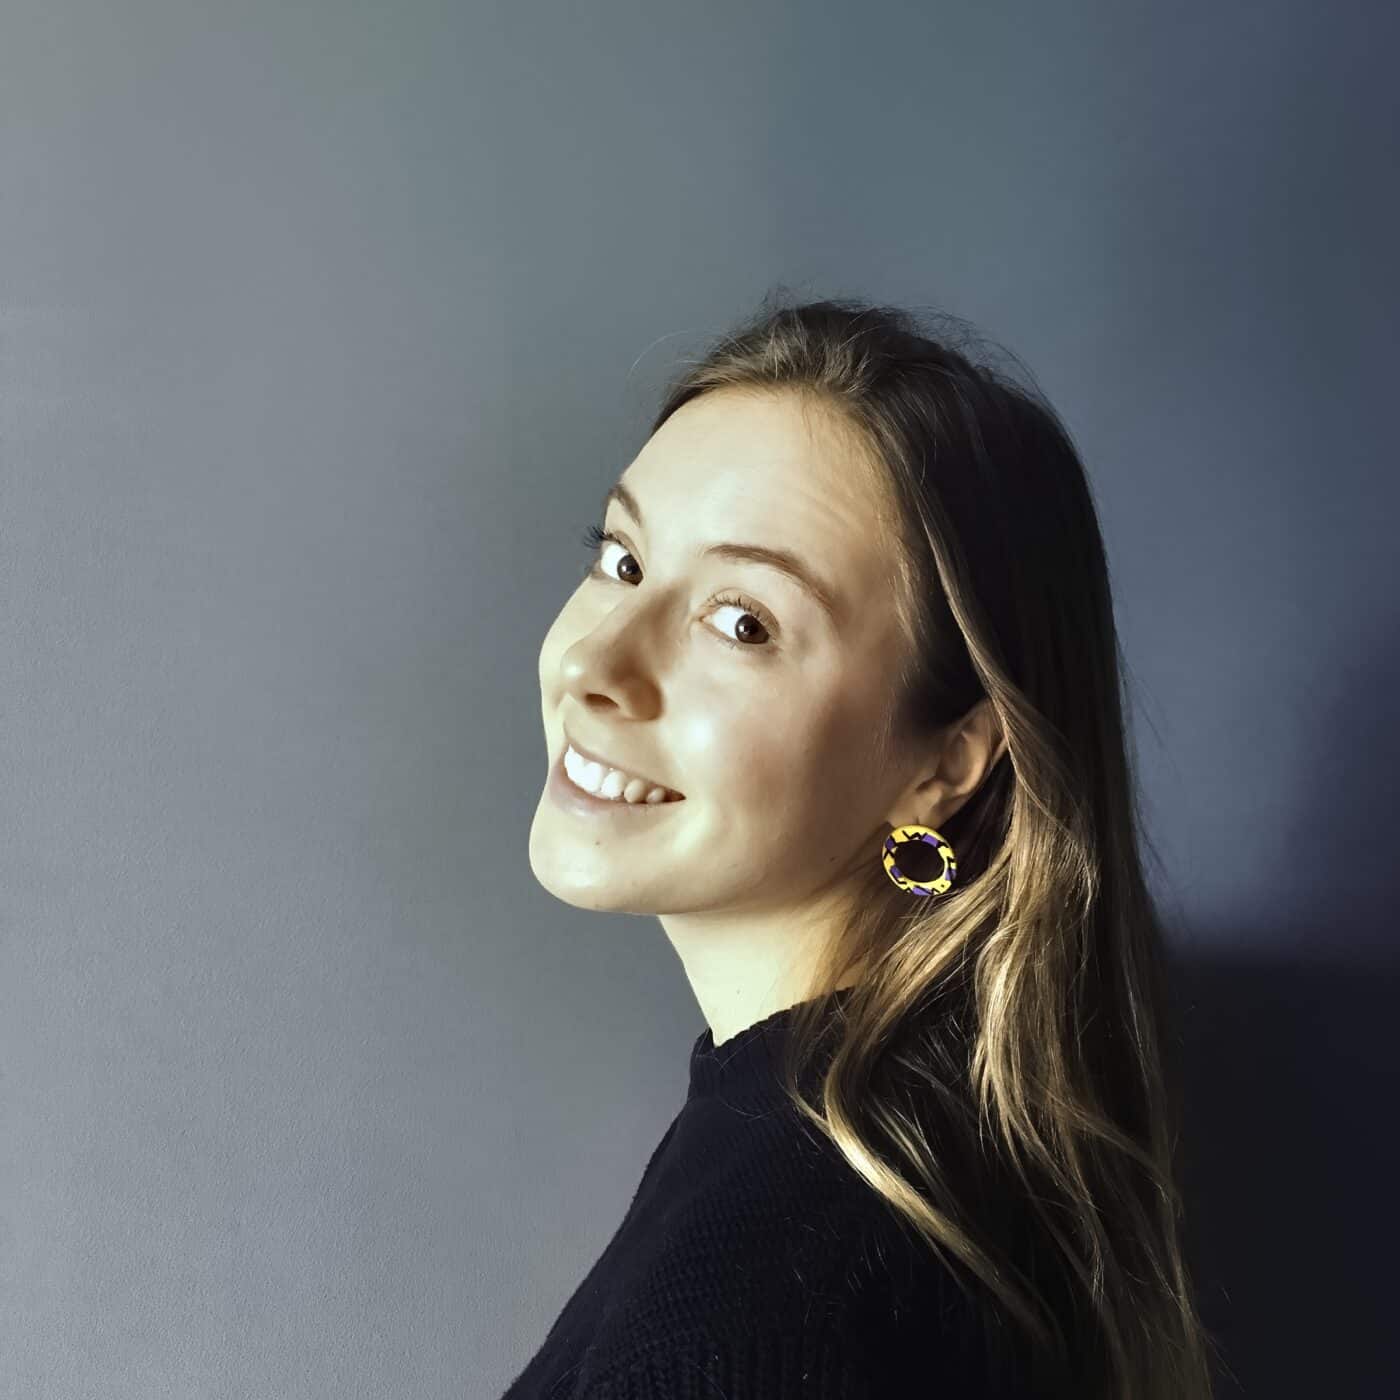 Elspeth Wilson. A white person with long dark blonde hair smiles at the camera. They are facing side on and wearing a black jumper and yellow earrings and are against a dark grey wall.